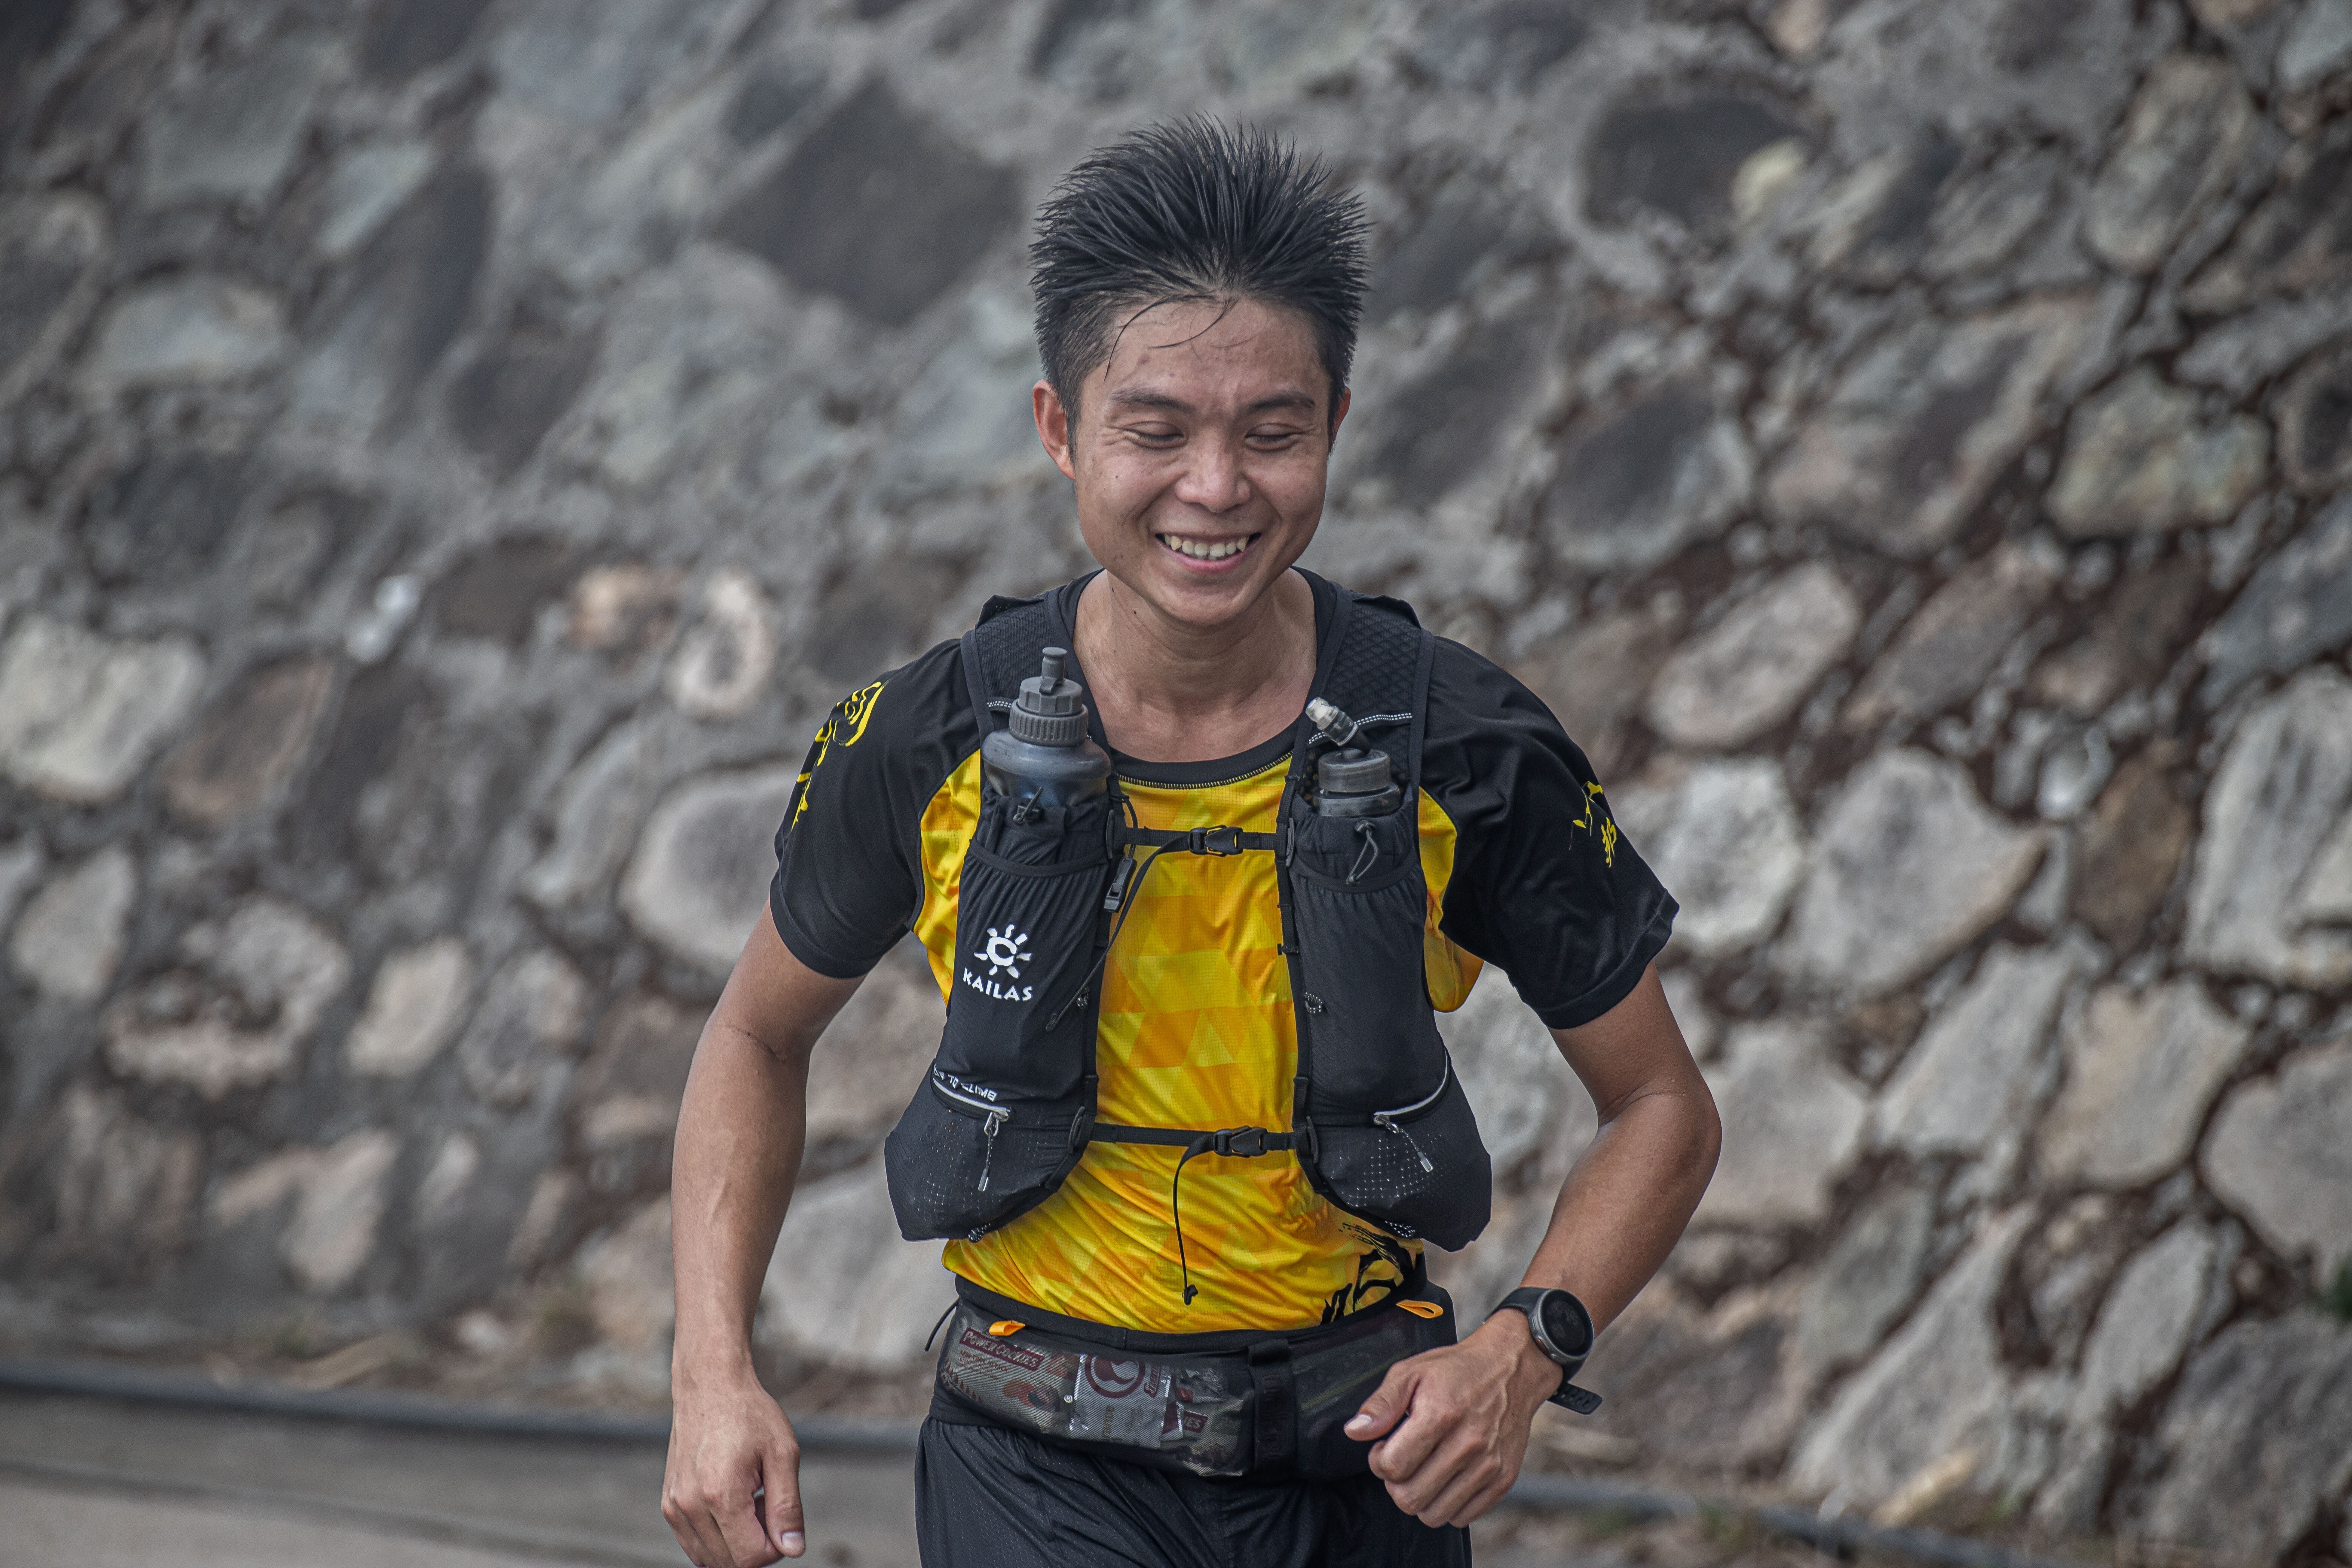 Law Kai-pong is one of 16 Hong Kong Four Trails Ultra Challenge ‘finishers’. Photos: Viola Shum